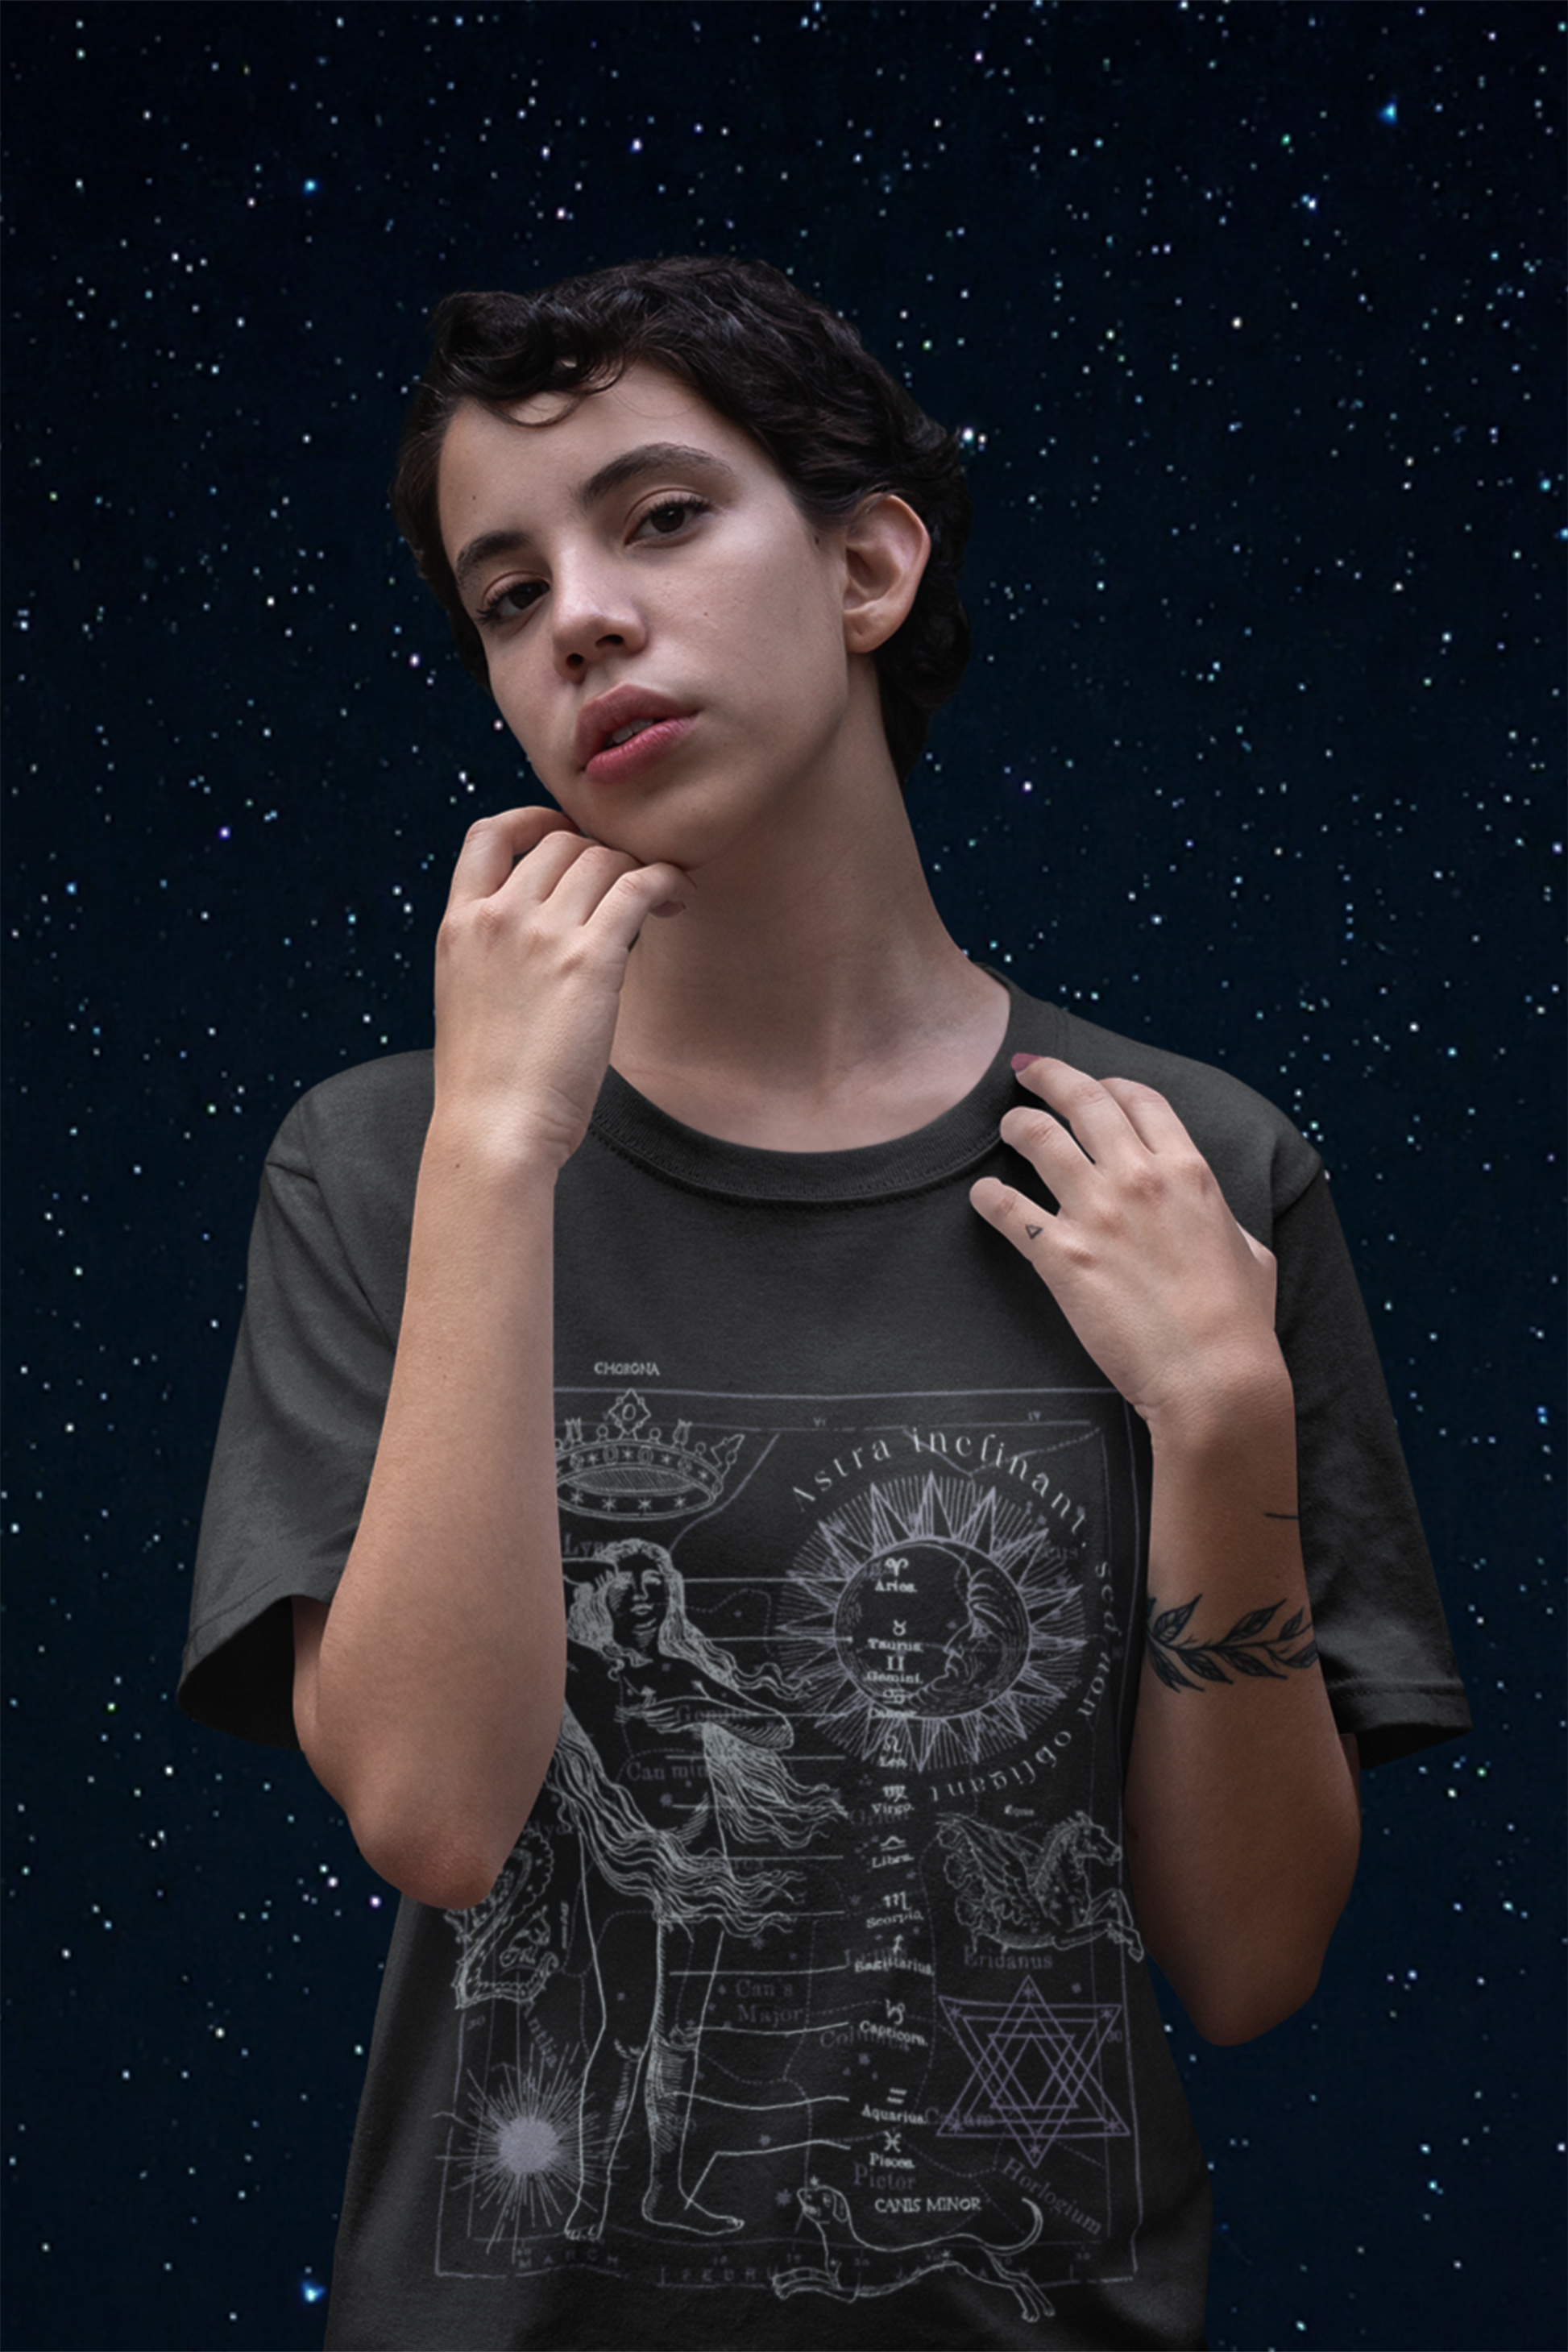 Vintage Esoteric Astrology Occult Clothing Shirt